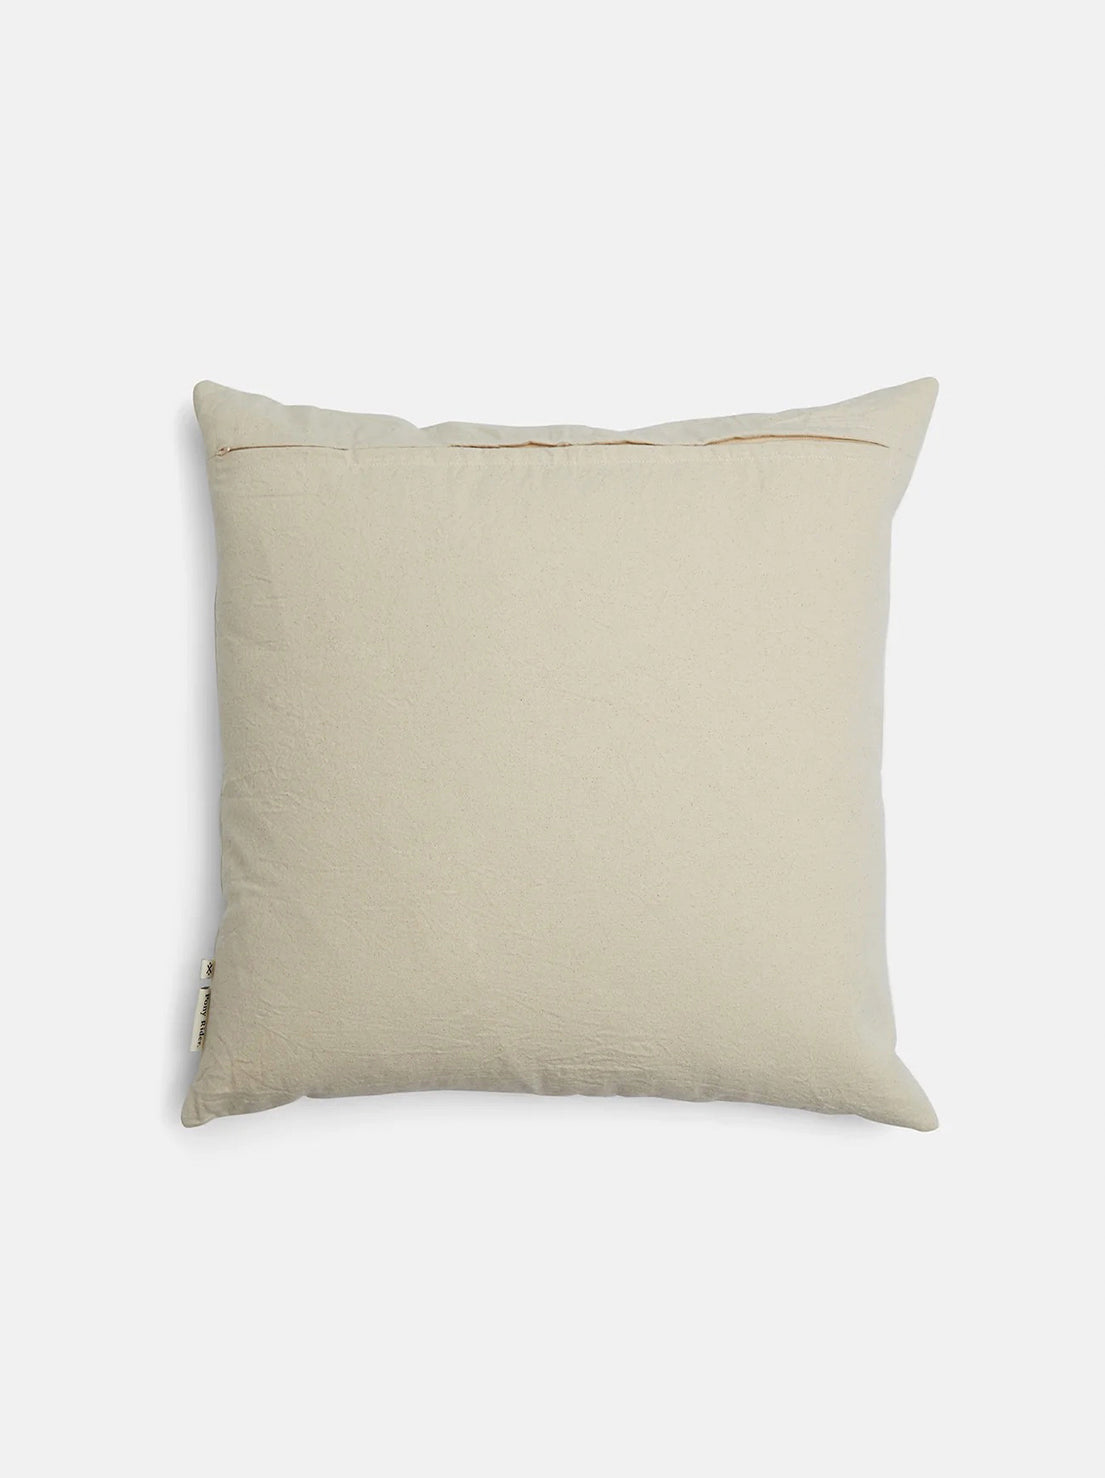 Pony Rider - Wanderful Cushion - With Inner - Hessian / Natural